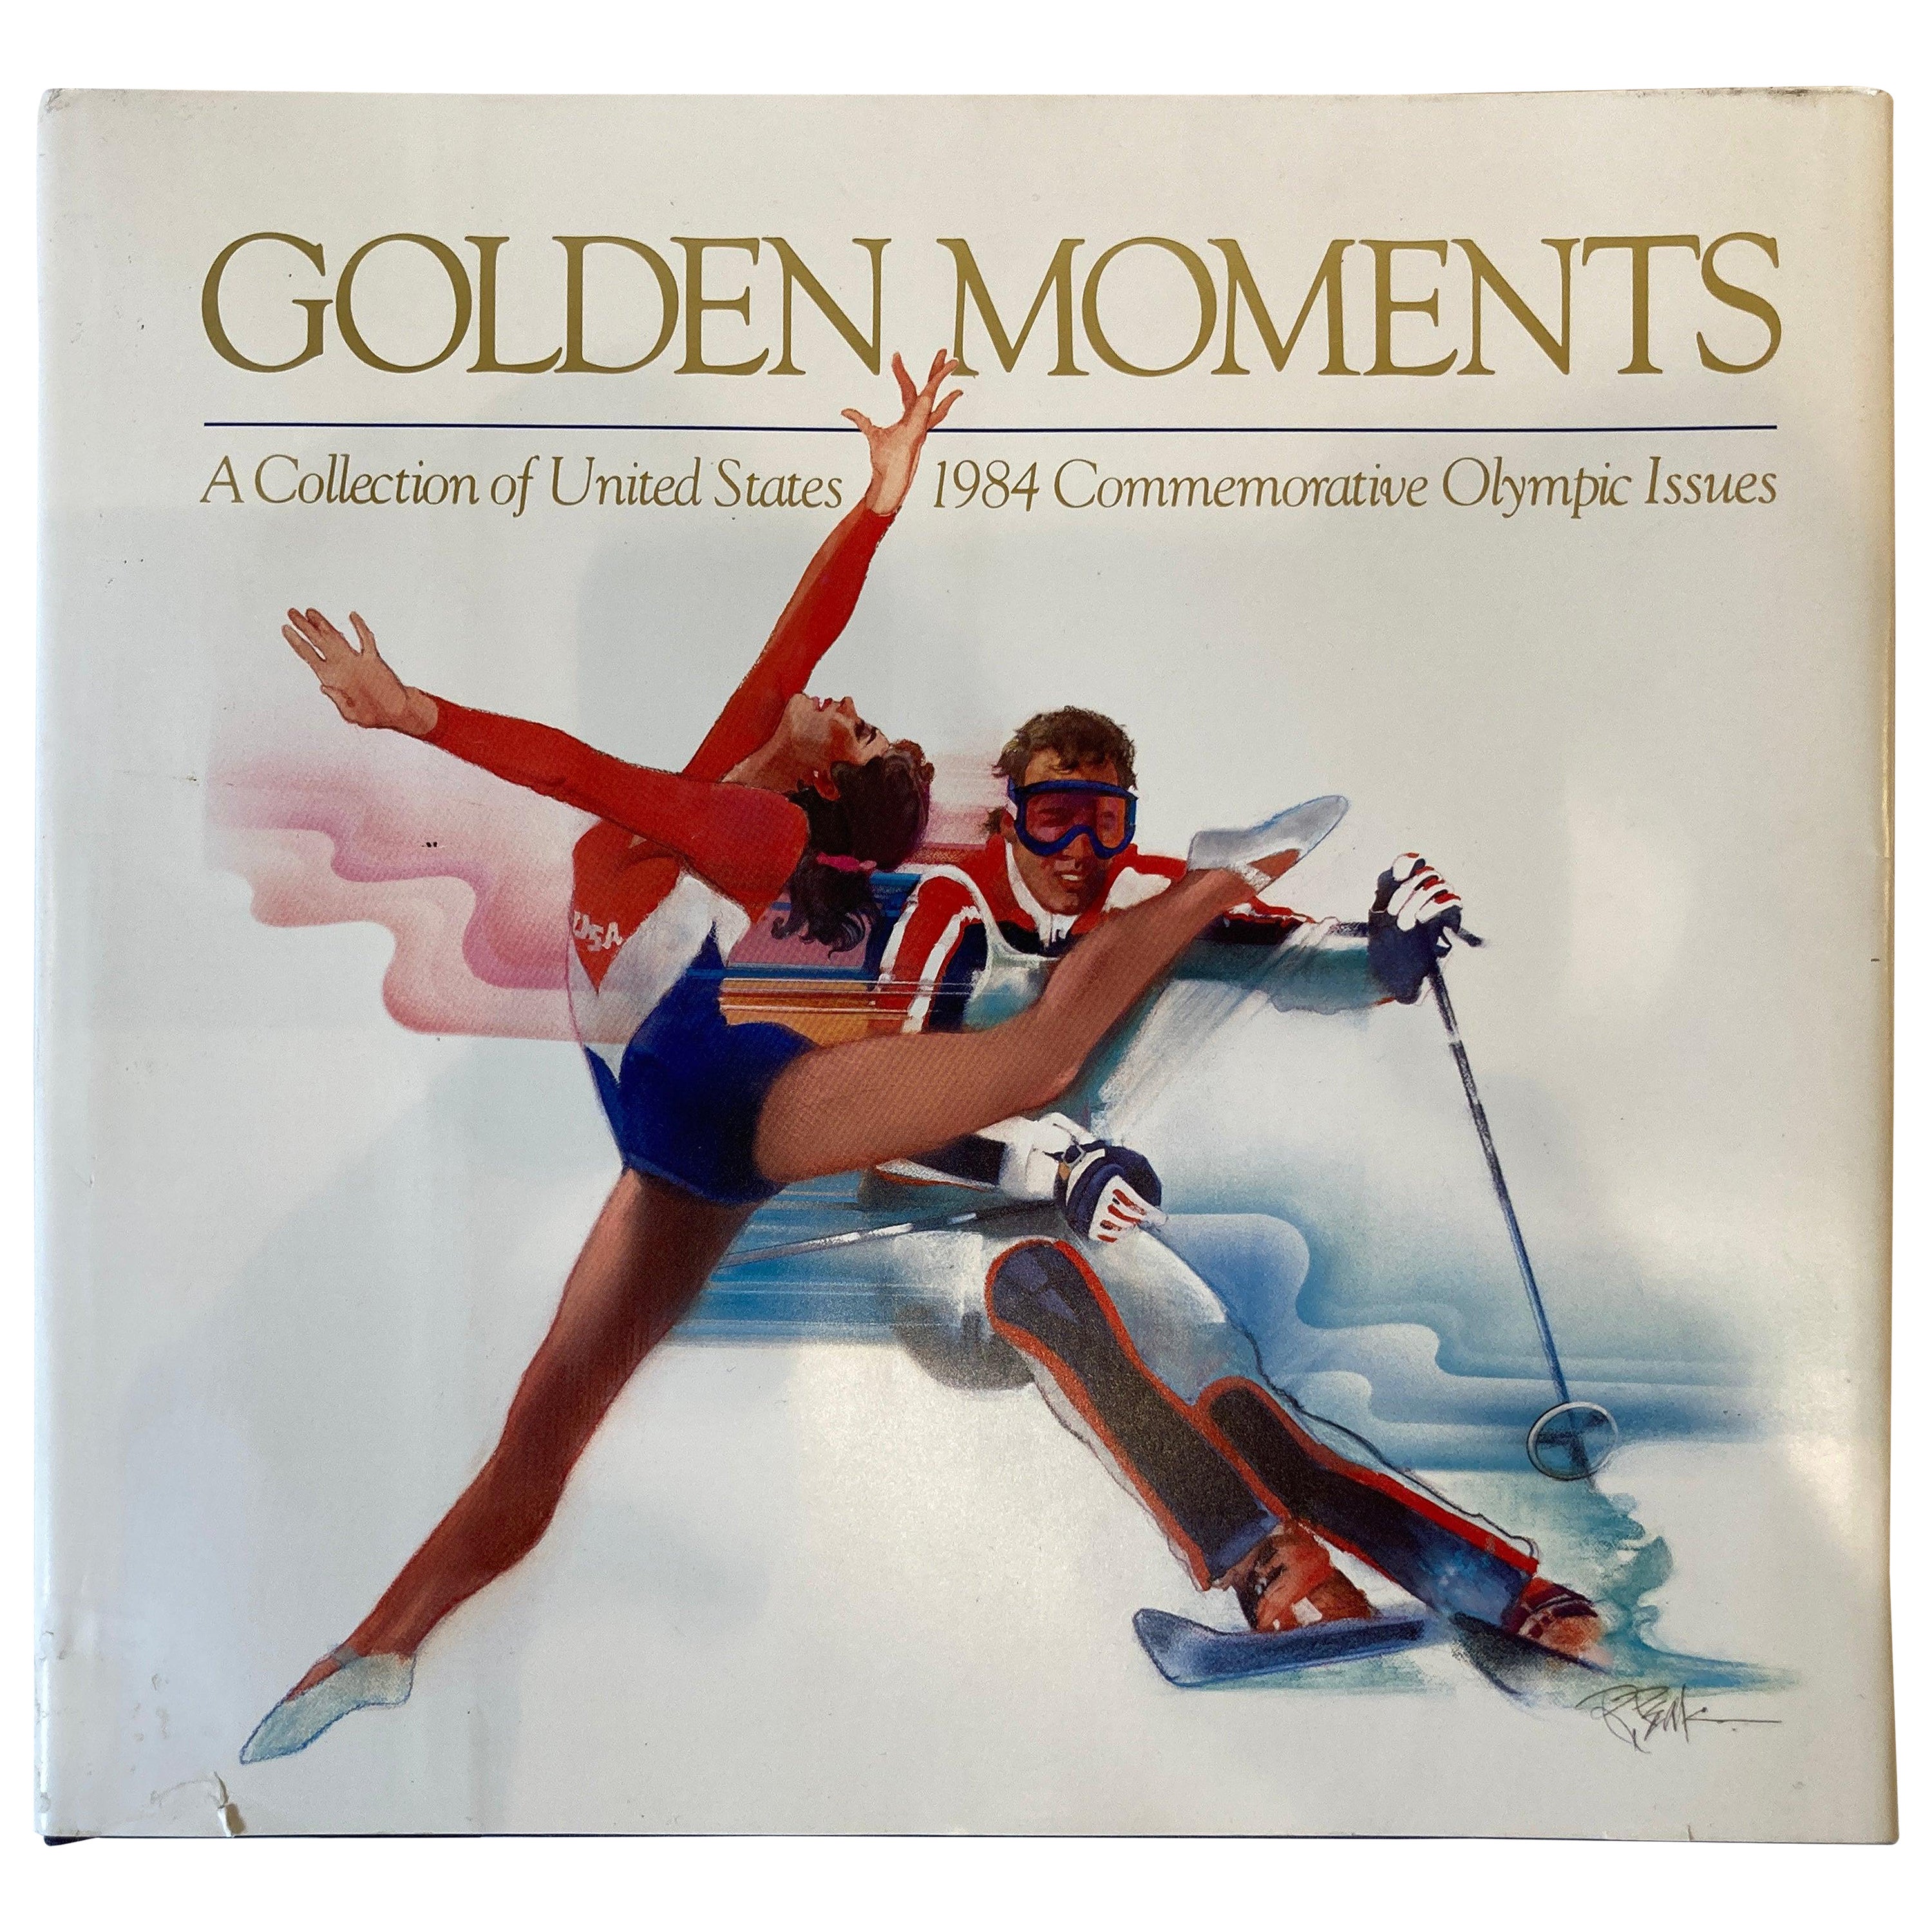 Golden Moments: a Collection of United States 1984 Commemorative Olympic Issues For Sale